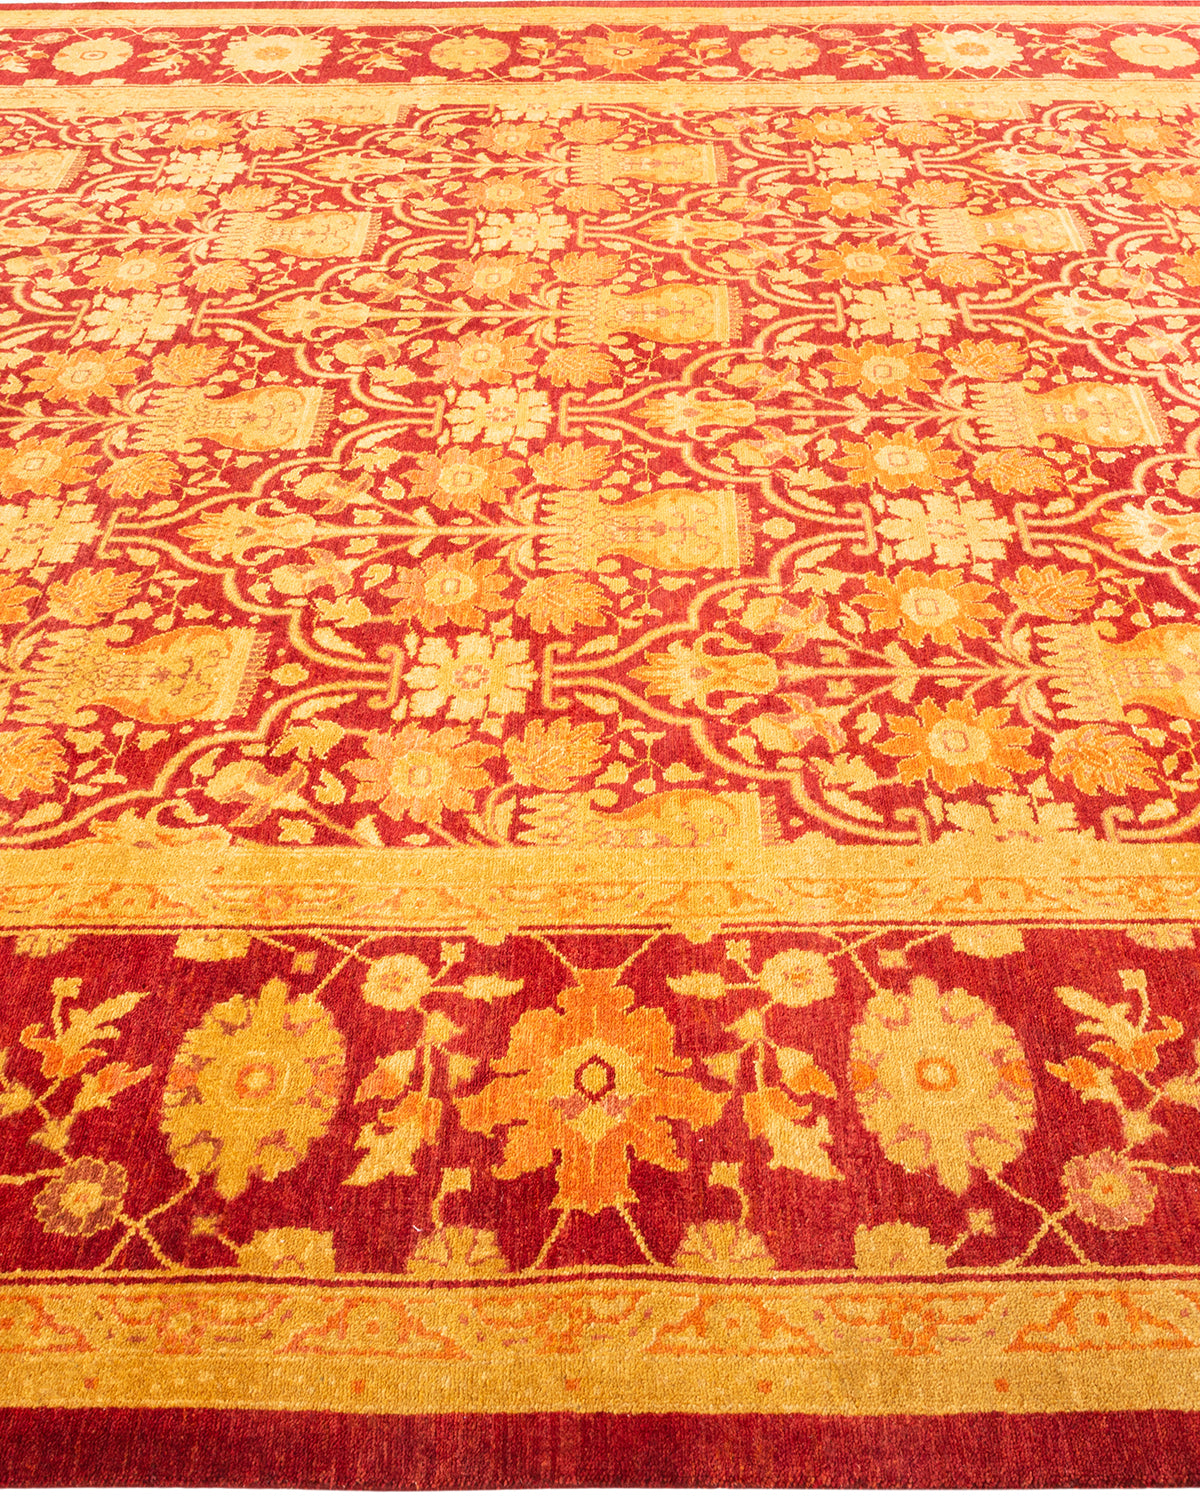 Eclectic, One-of-a-Kind Hand-Knotted Area Rug  - Red, 8' 2" x 15' 7"